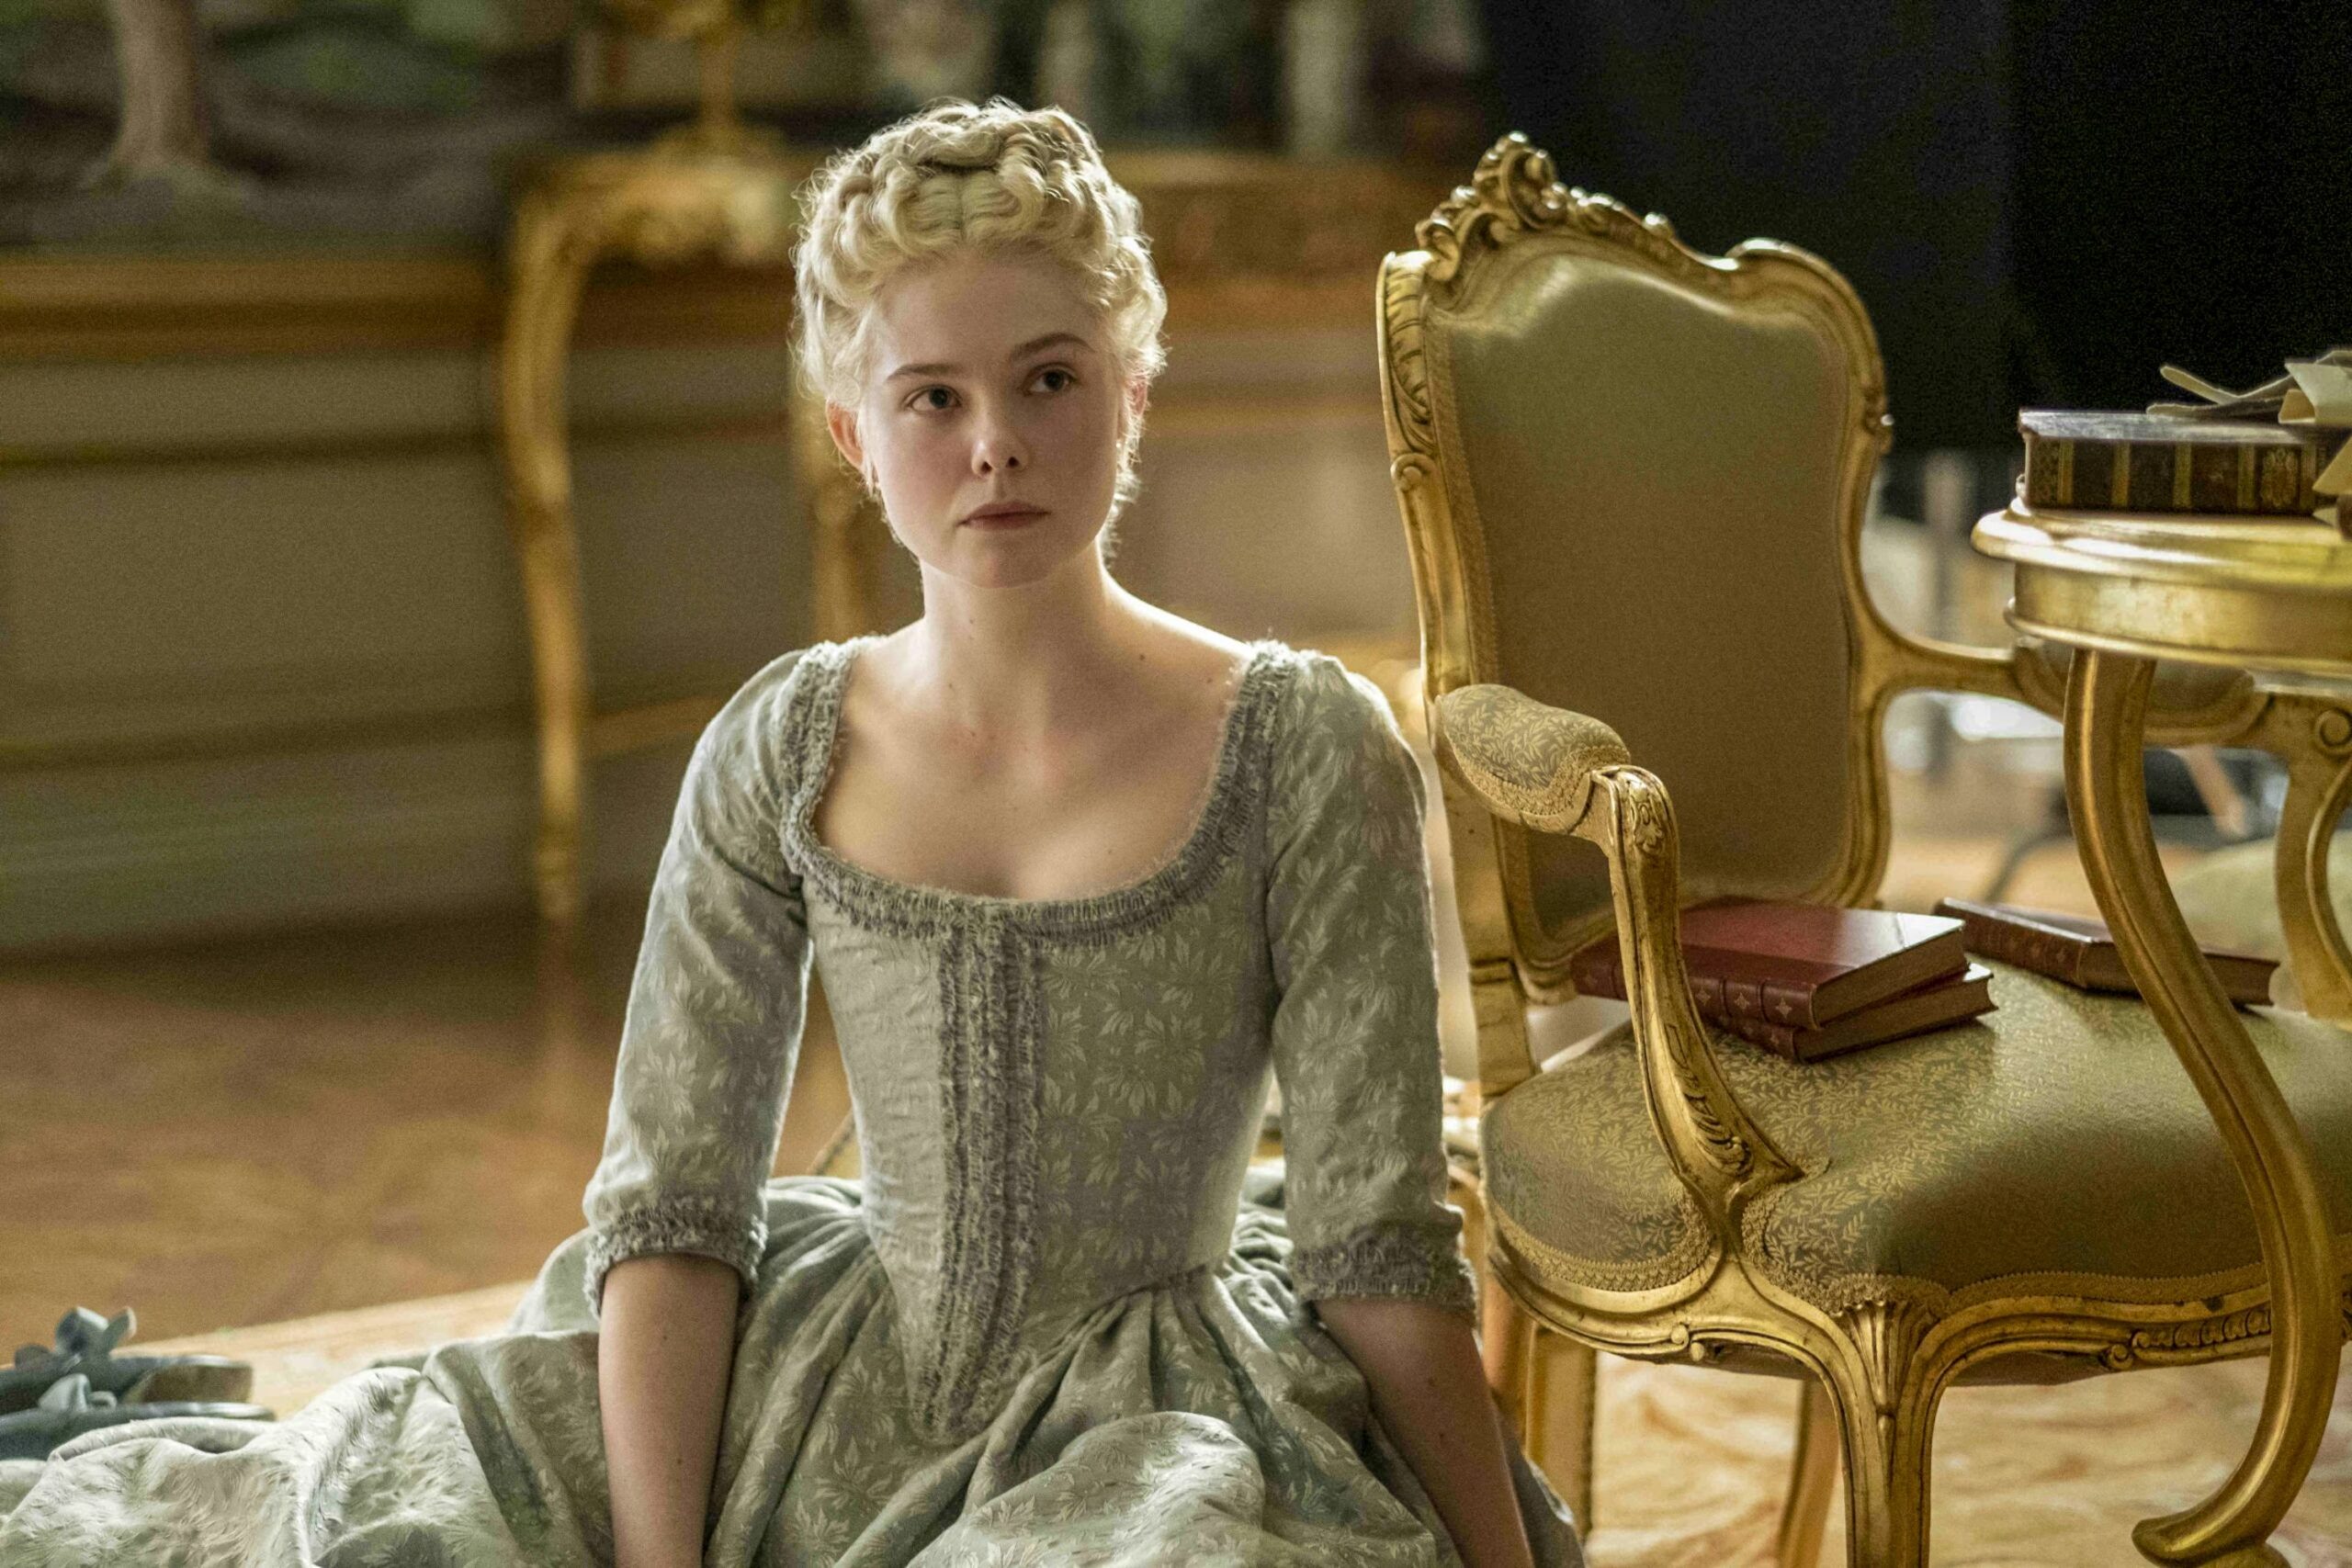 ‘The Great’ Trailer: Elle Fanning Rules In Hulu Comedy Series From ‘The Favourite’ Writer